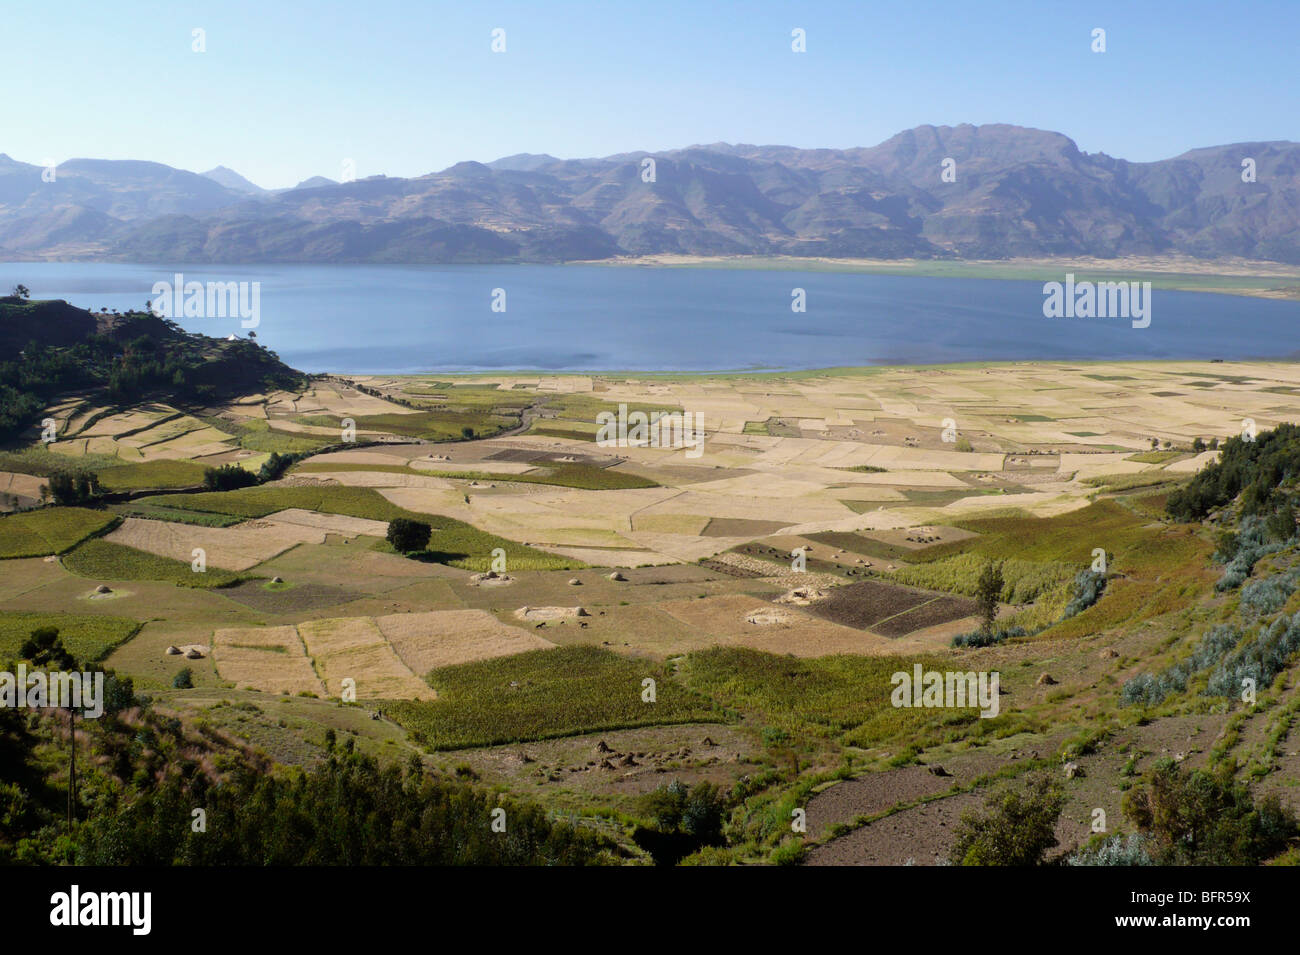 View over agricultural land from highland plateau towards a valley lake surrounded by agriculture Stock Photo